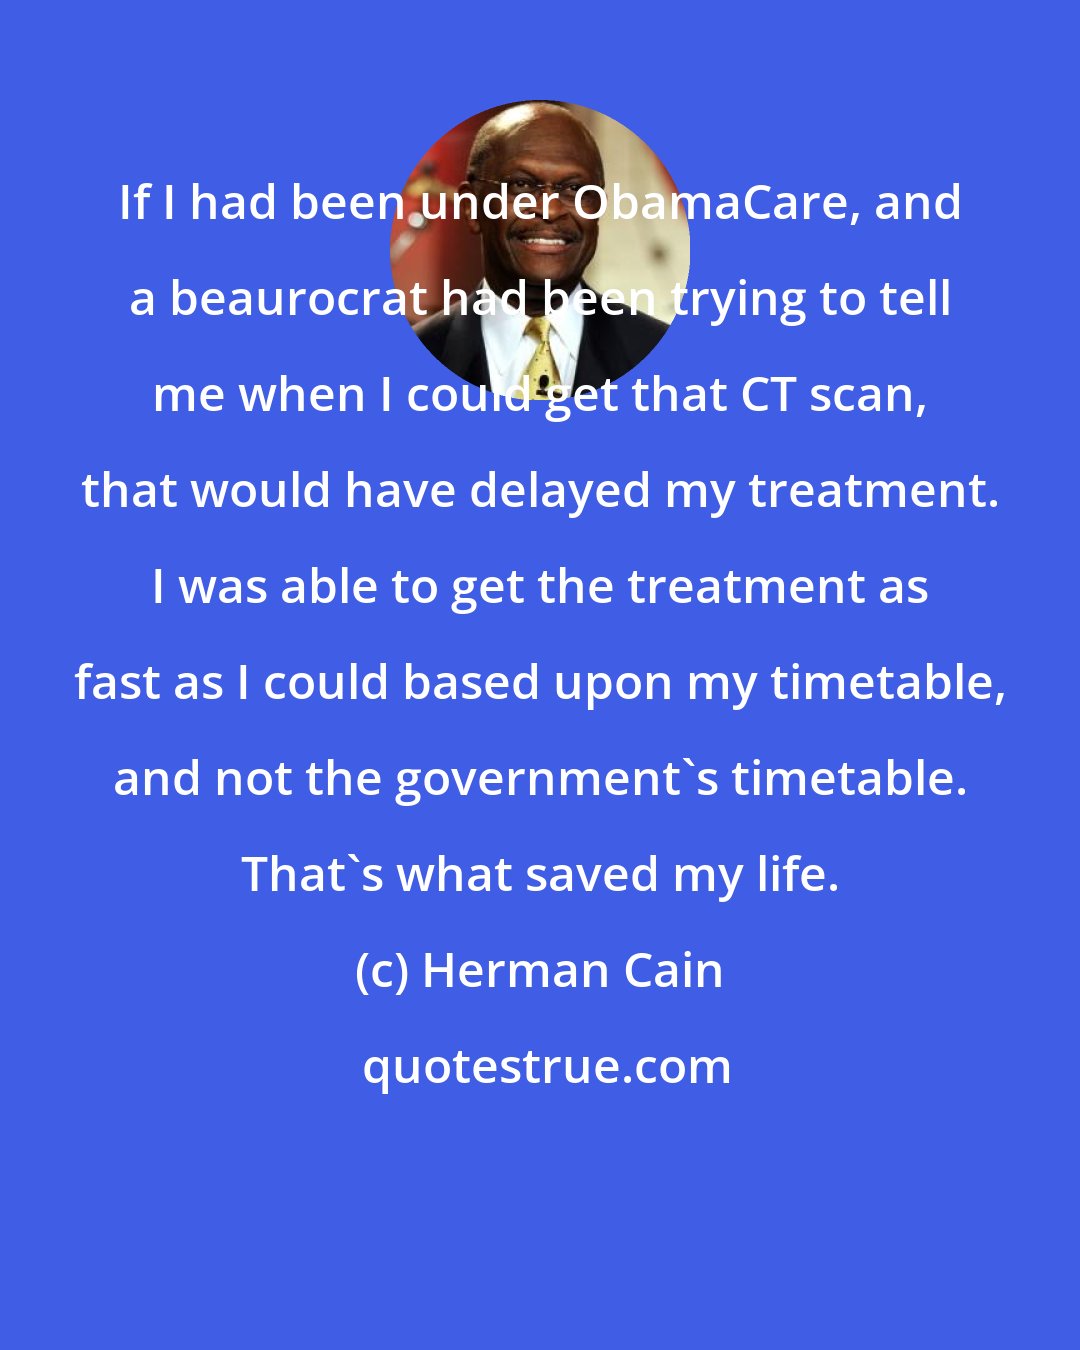 Herman Cain: If I had been under ObamaCare, and a beaurocrat had been trying to tell me when I could get that CT scan, that would have delayed my treatment. I was able to get the treatment as fast as I could based upon my timetable, and not the government's timetable. That's what saved my life.